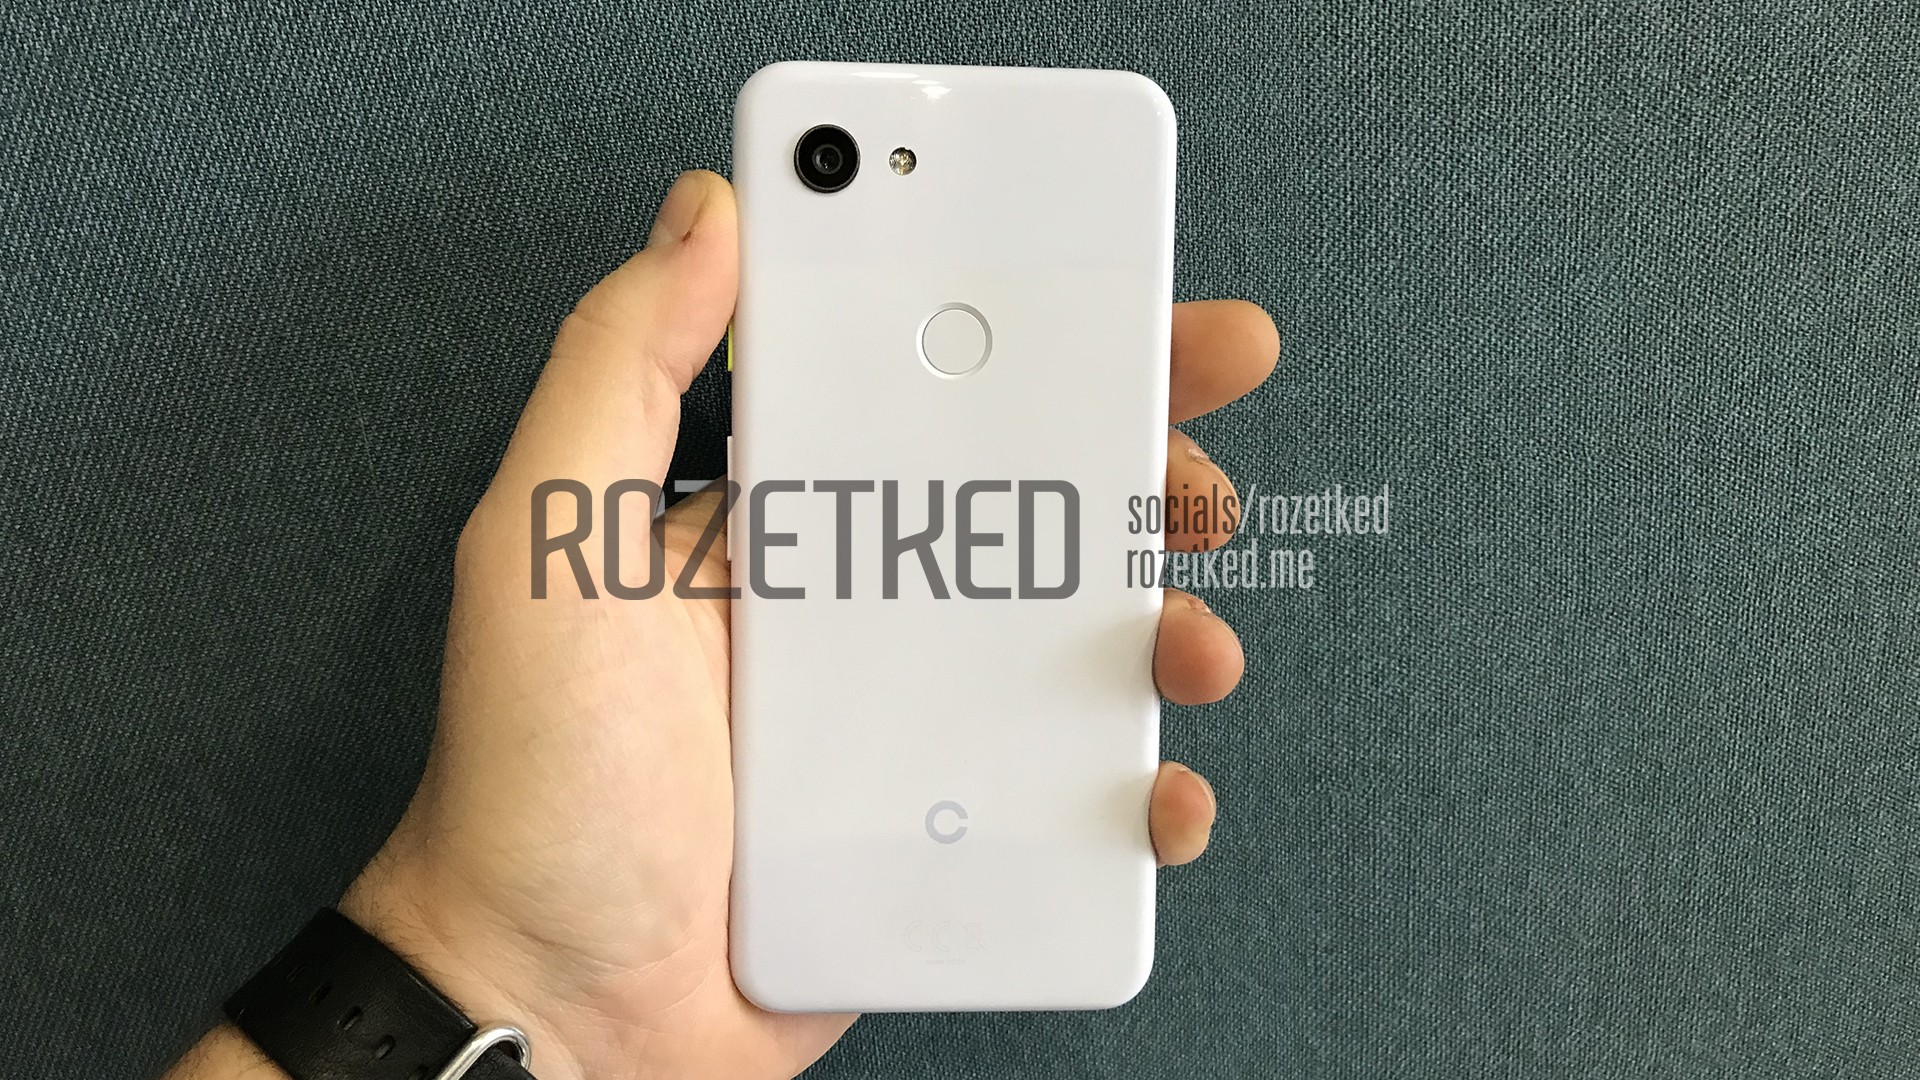 Sample Photos Leakes from the leaked Pixel 3 Lite 1